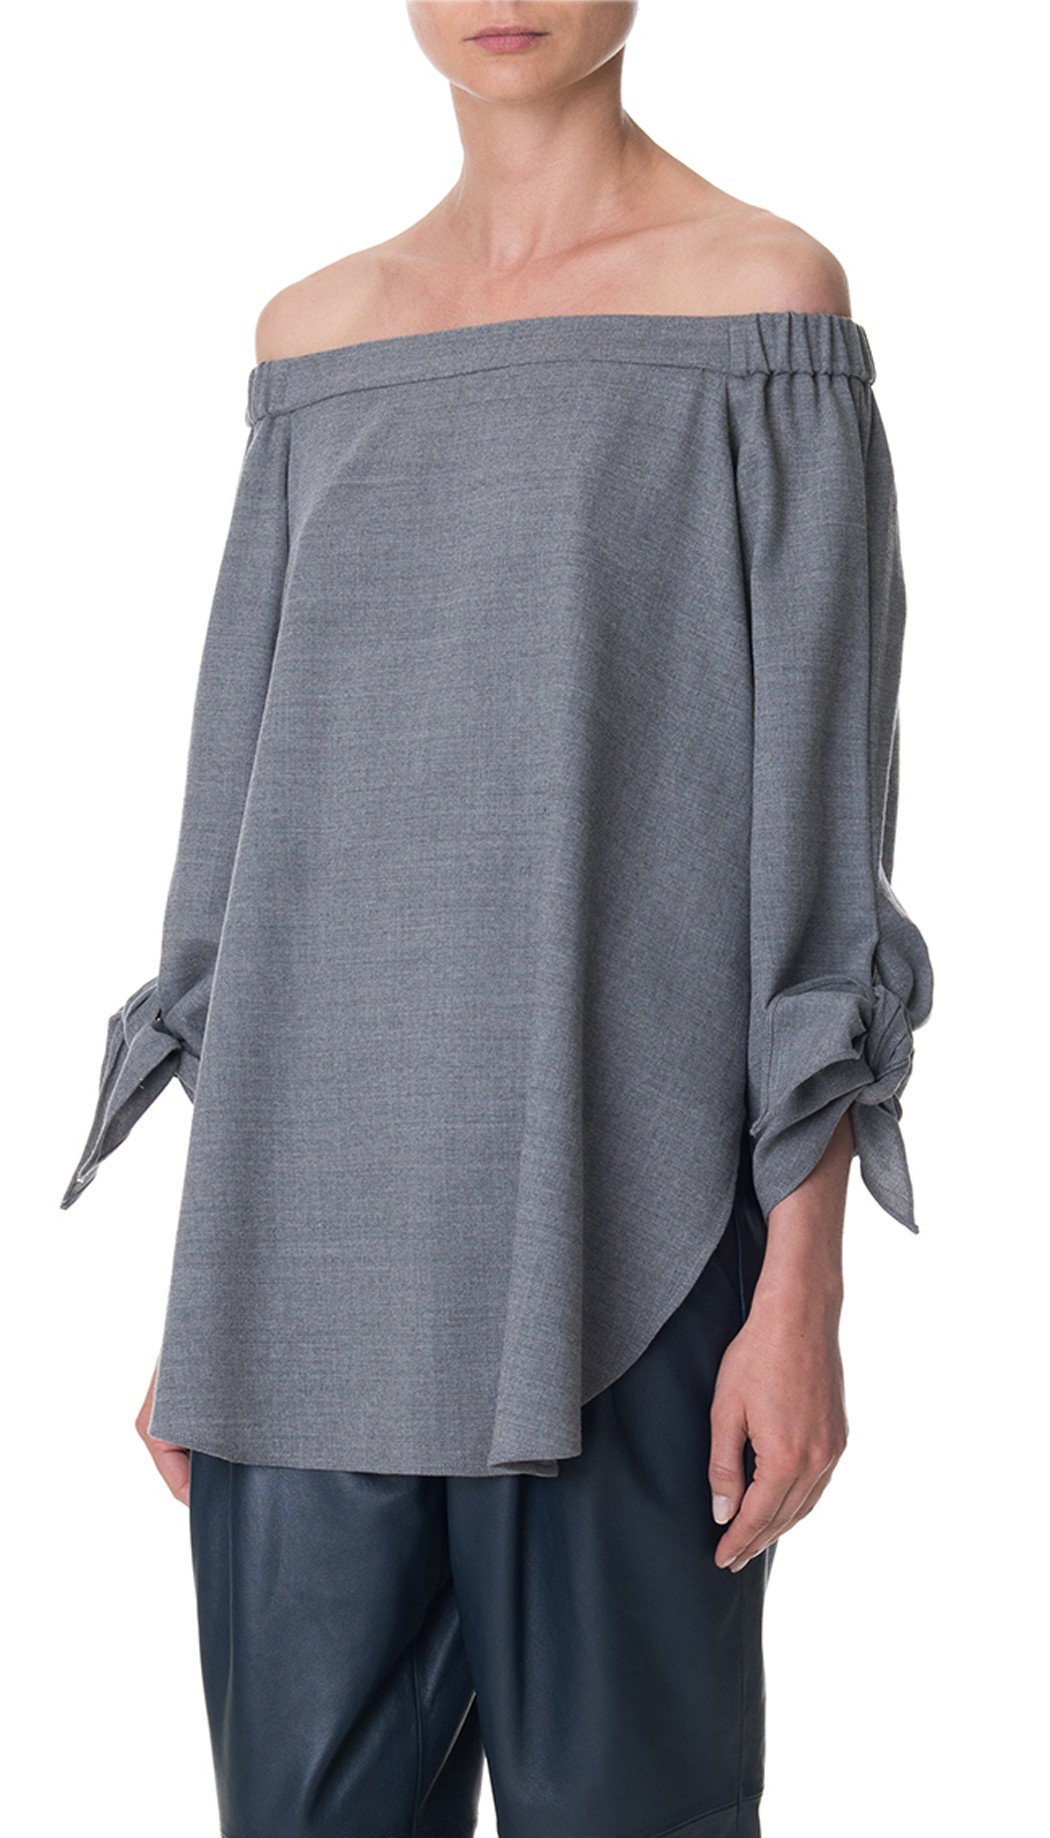 Tibi Lightweight Crepe Wool Off-the-shoulder Tunic in Grey (Gray) - Lyst